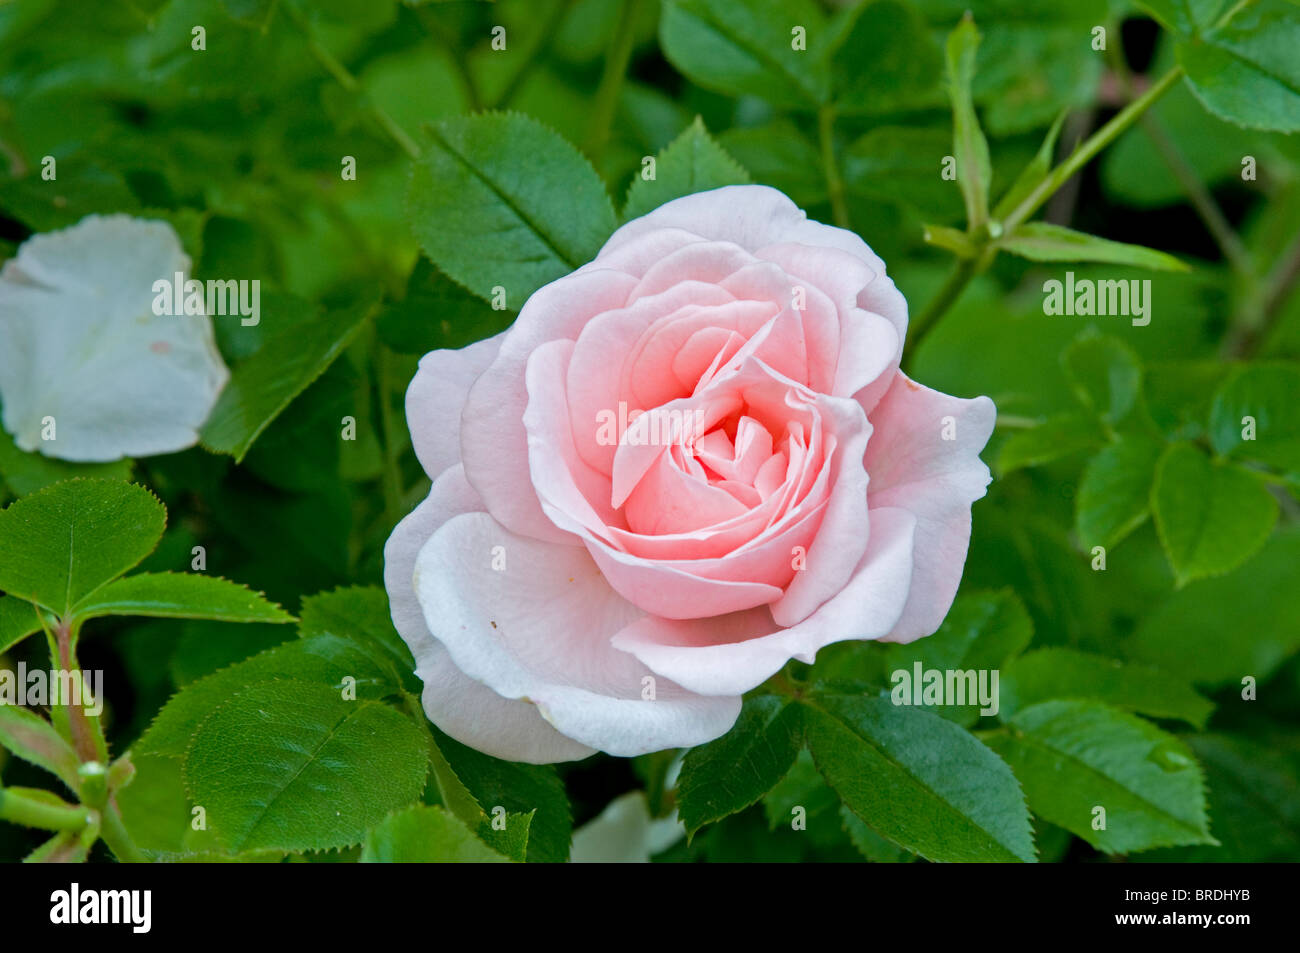 Single soft pink flower of patio rose 'Lovely Bride' Stock Photo